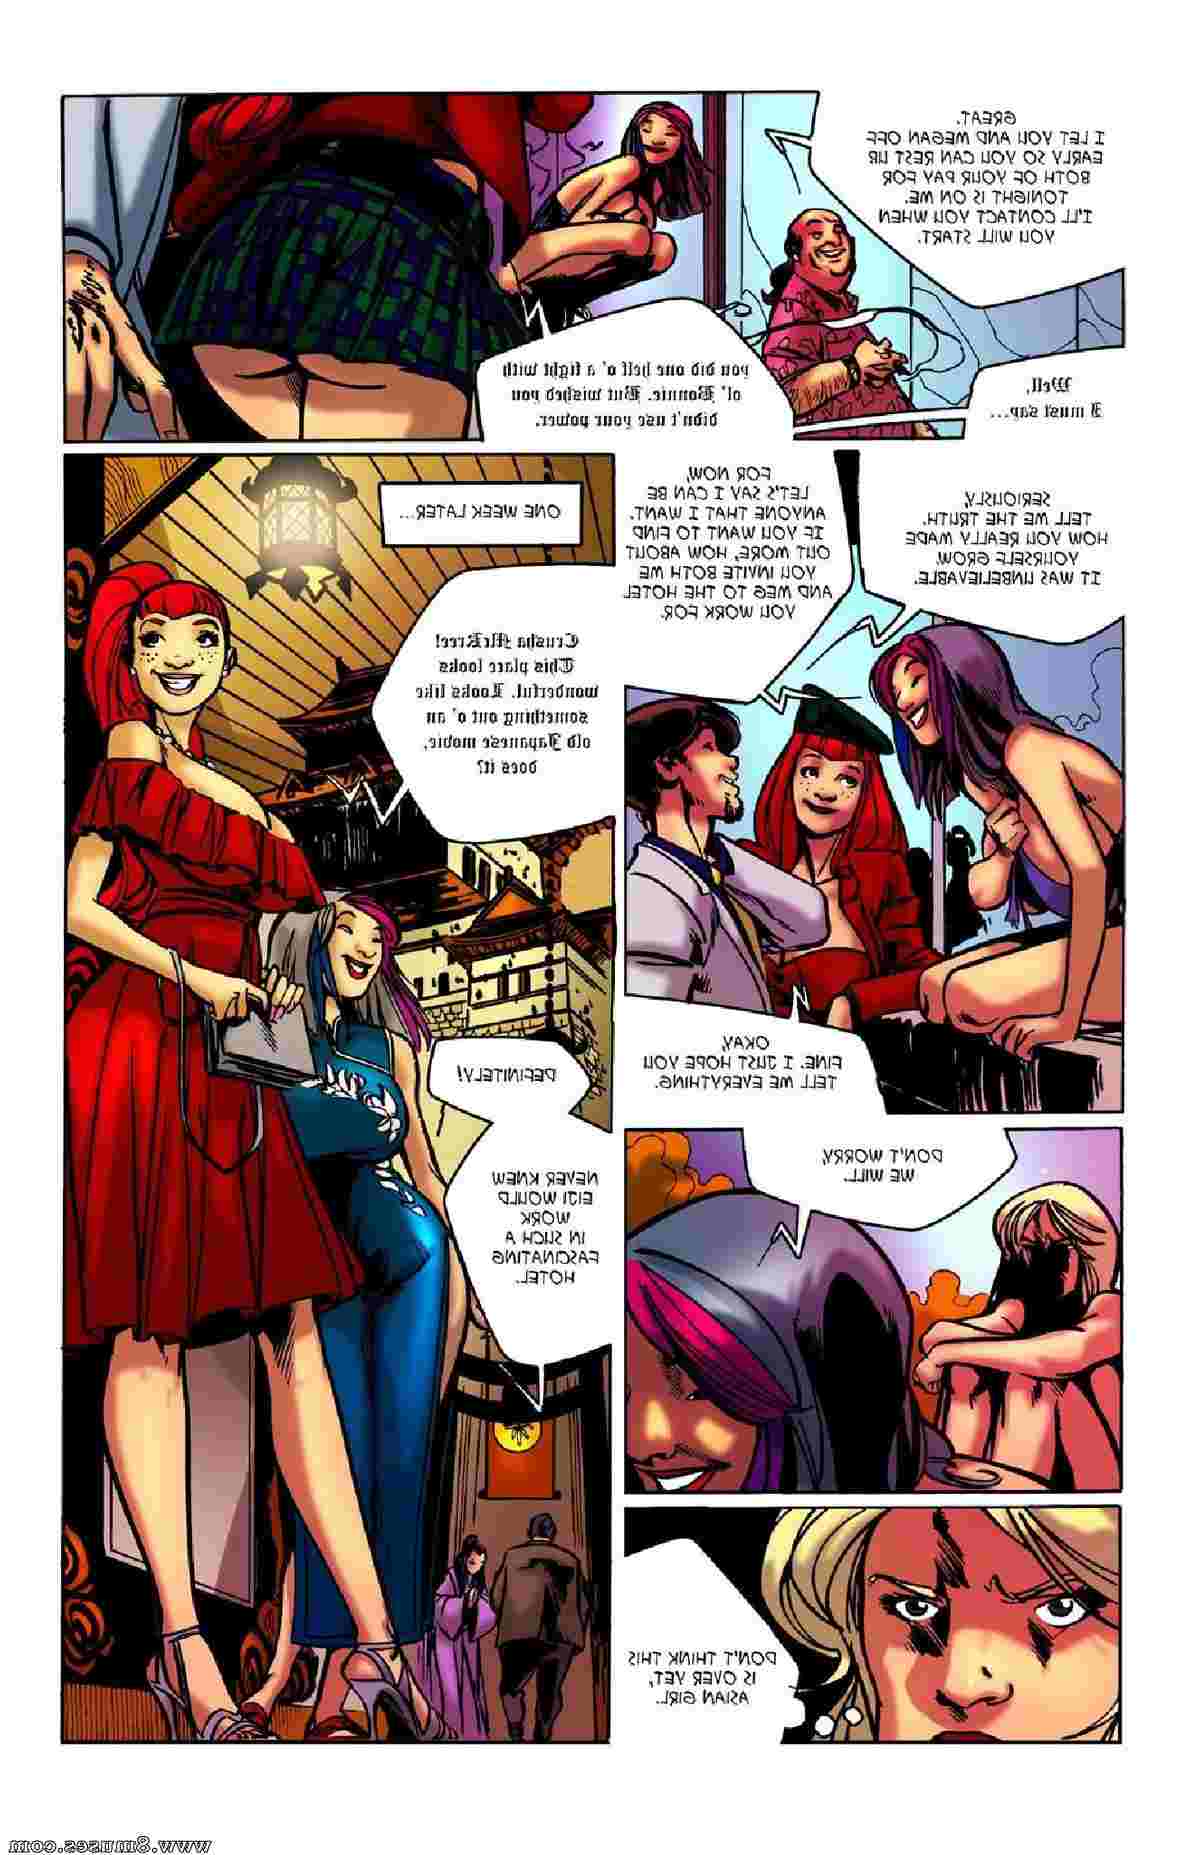 BE-Story-Club-Comics/Changing-and-Growing-in-Las-Vegas Changing_and_Growing_in_Las_Vegas__8muses_-_Sex_and_Porn_Comics_37.jpg